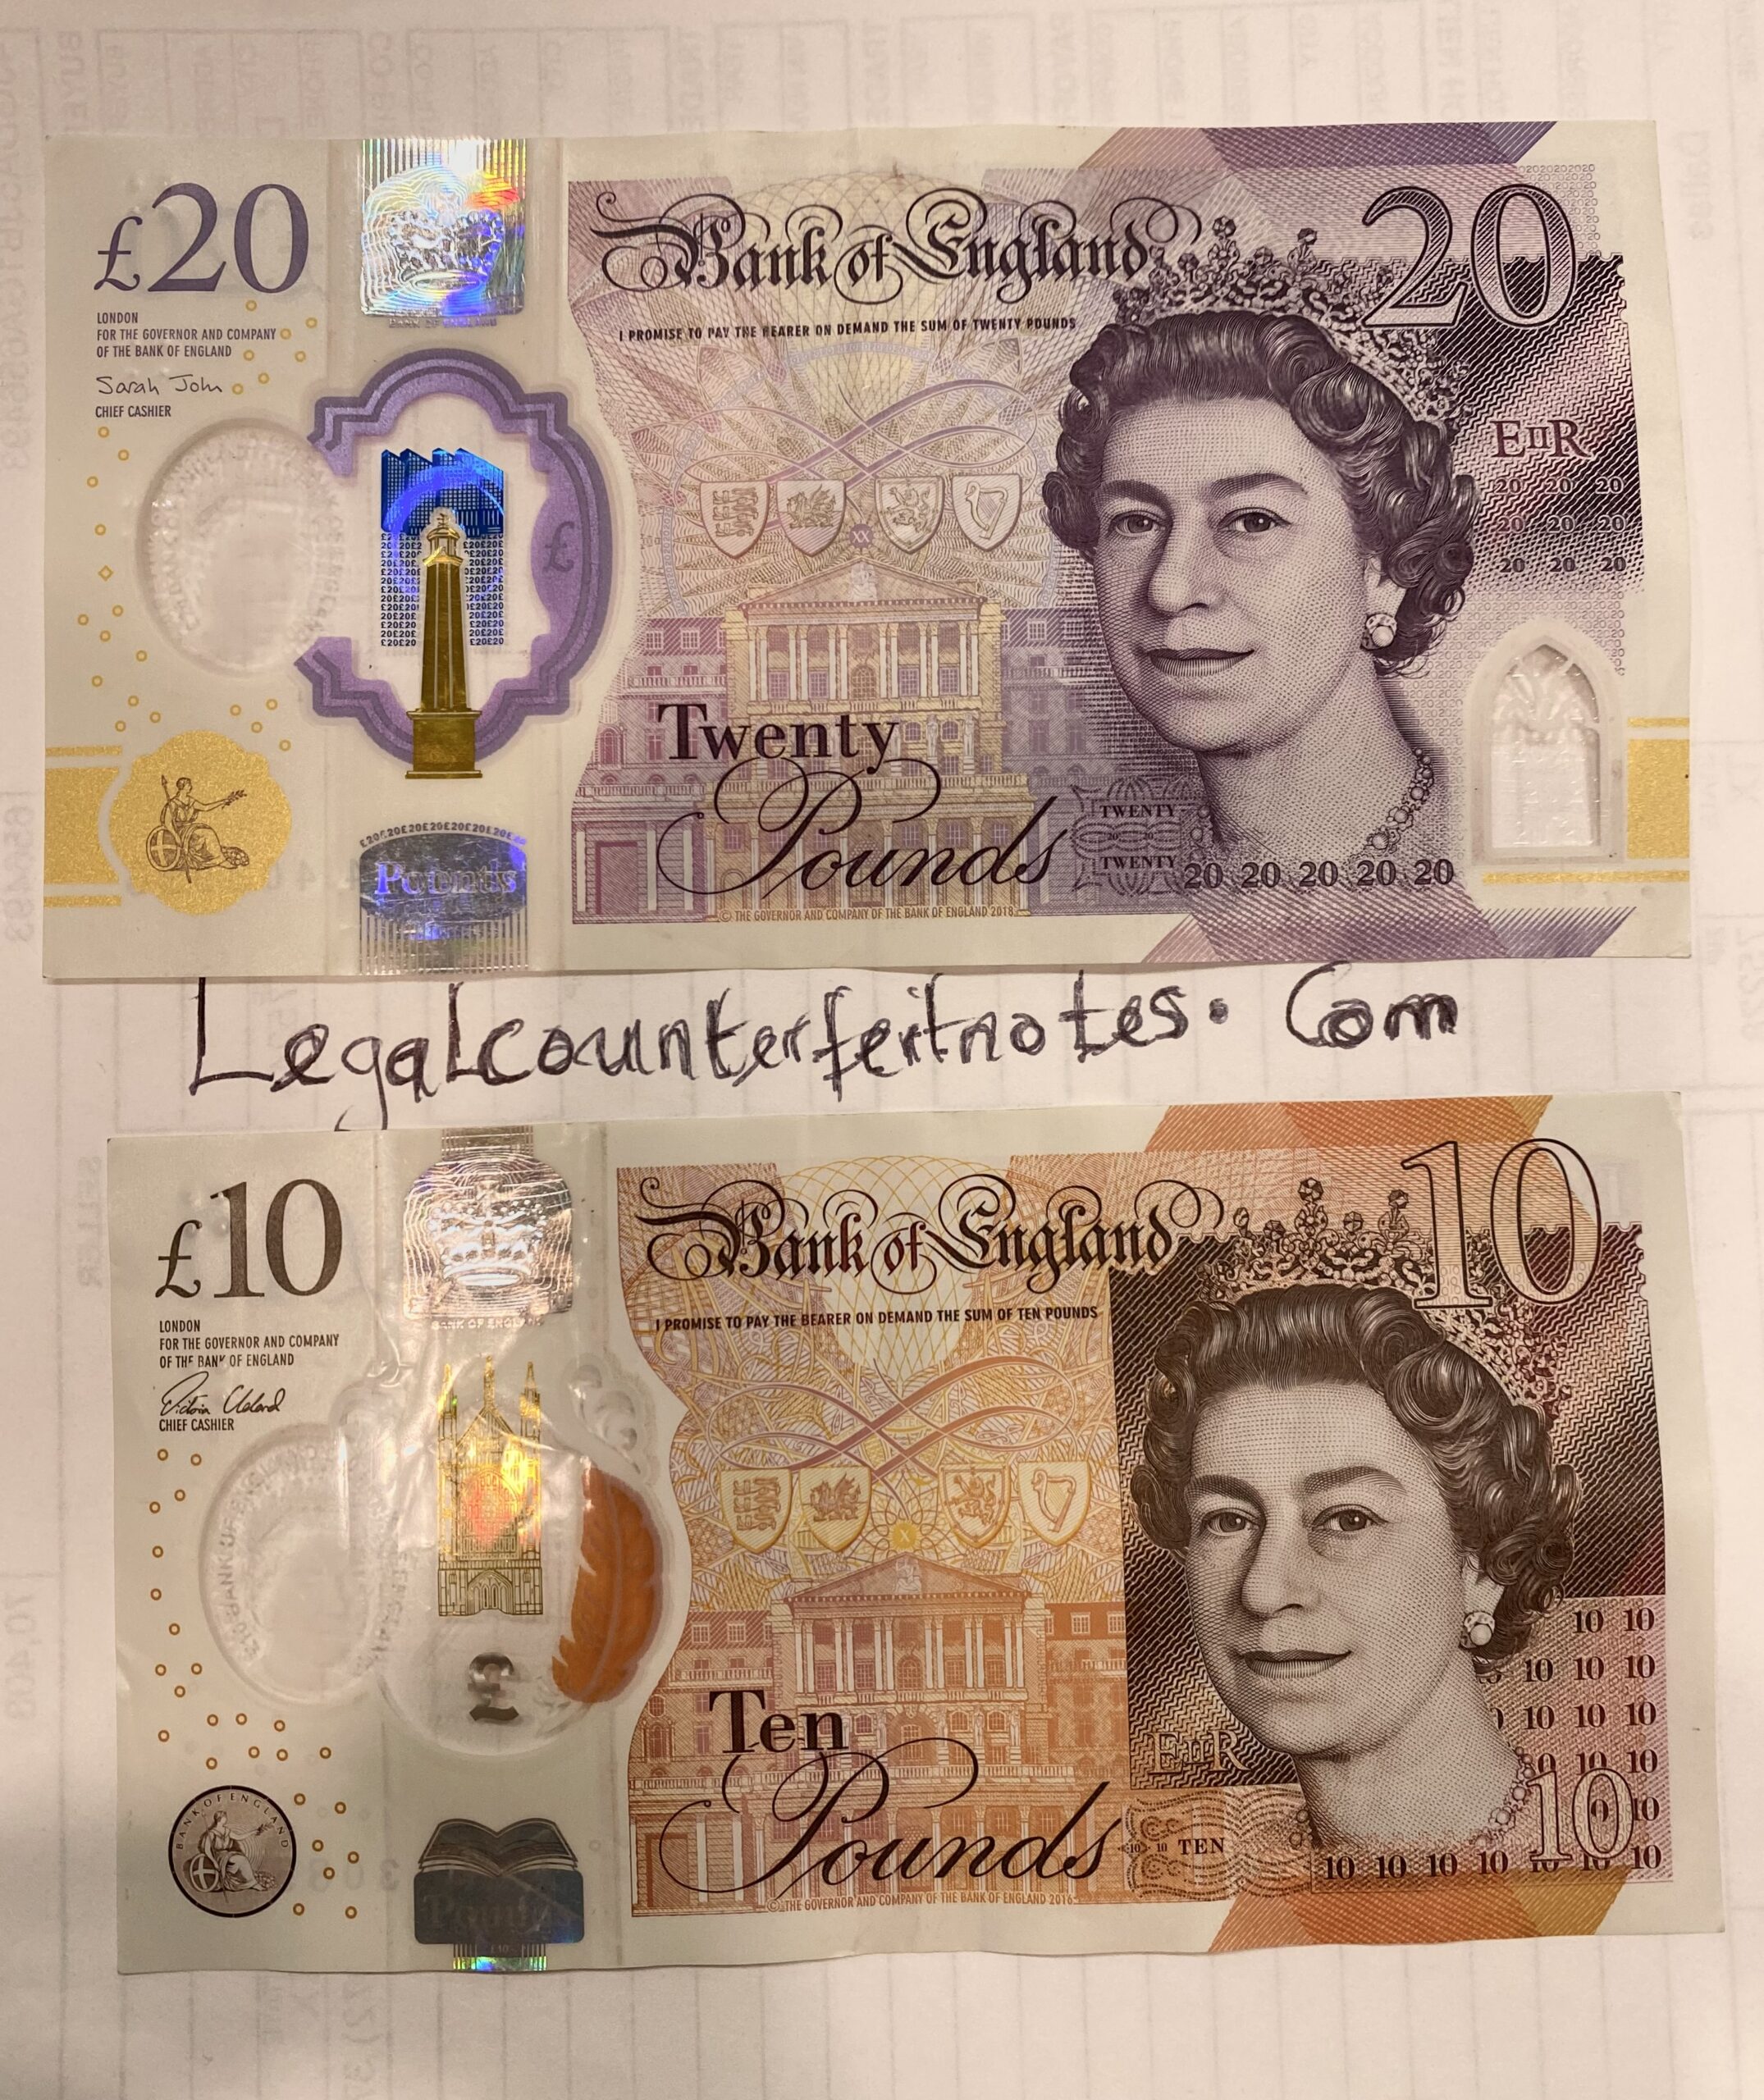 Authentic-Looking Fake UK Money for Sale in UK | Legalcounterfeitnote.com